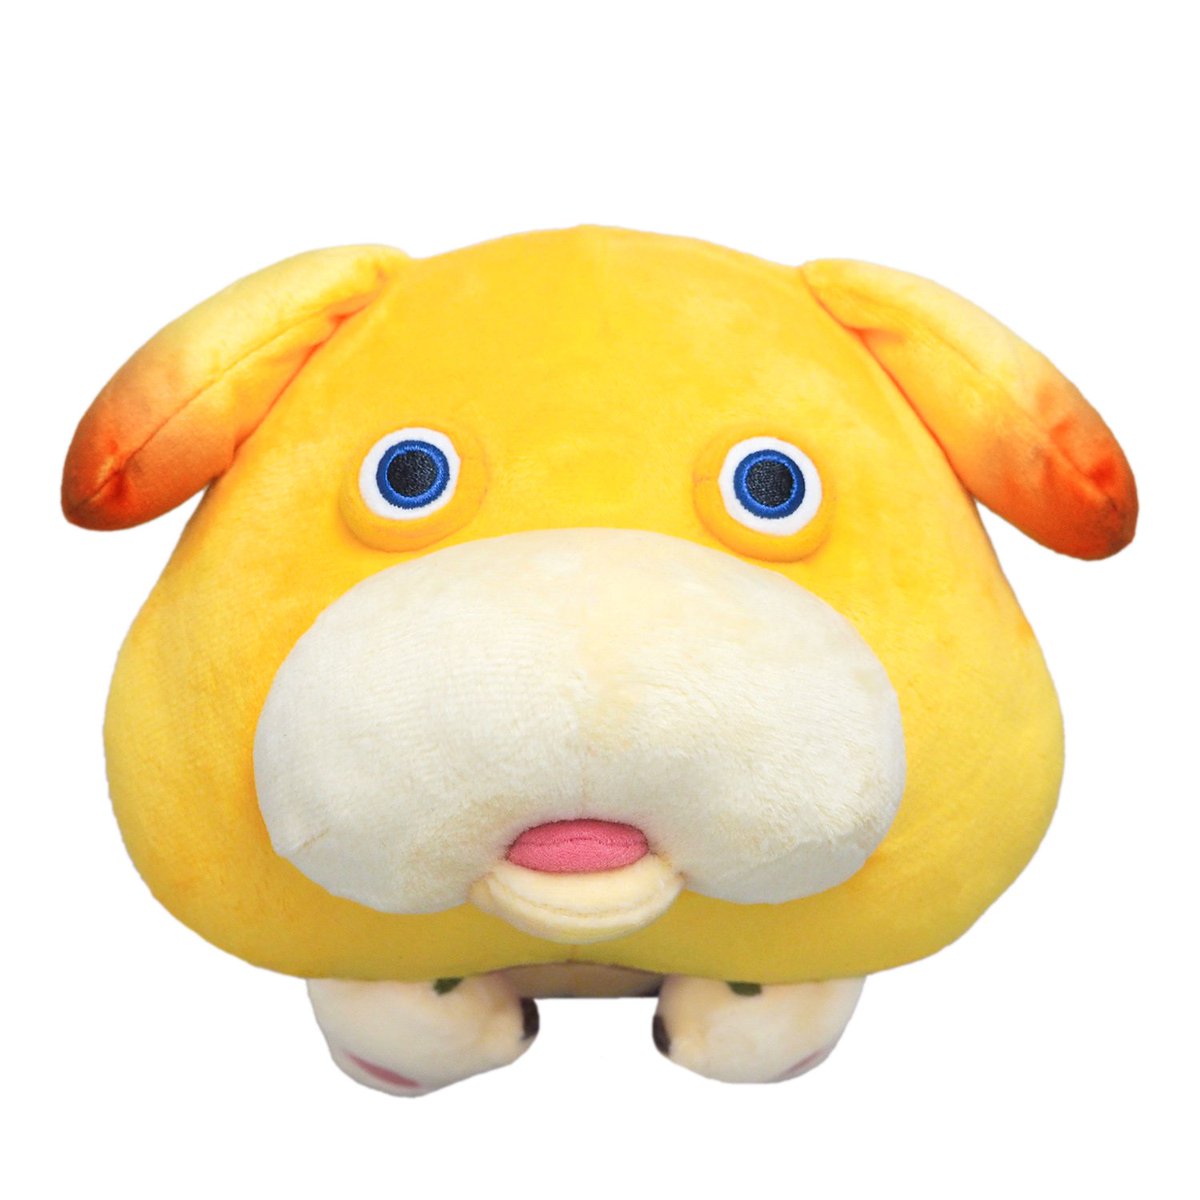 oatchi plush looks like he hasn't blinked in a millennium

someone give him eyedrops